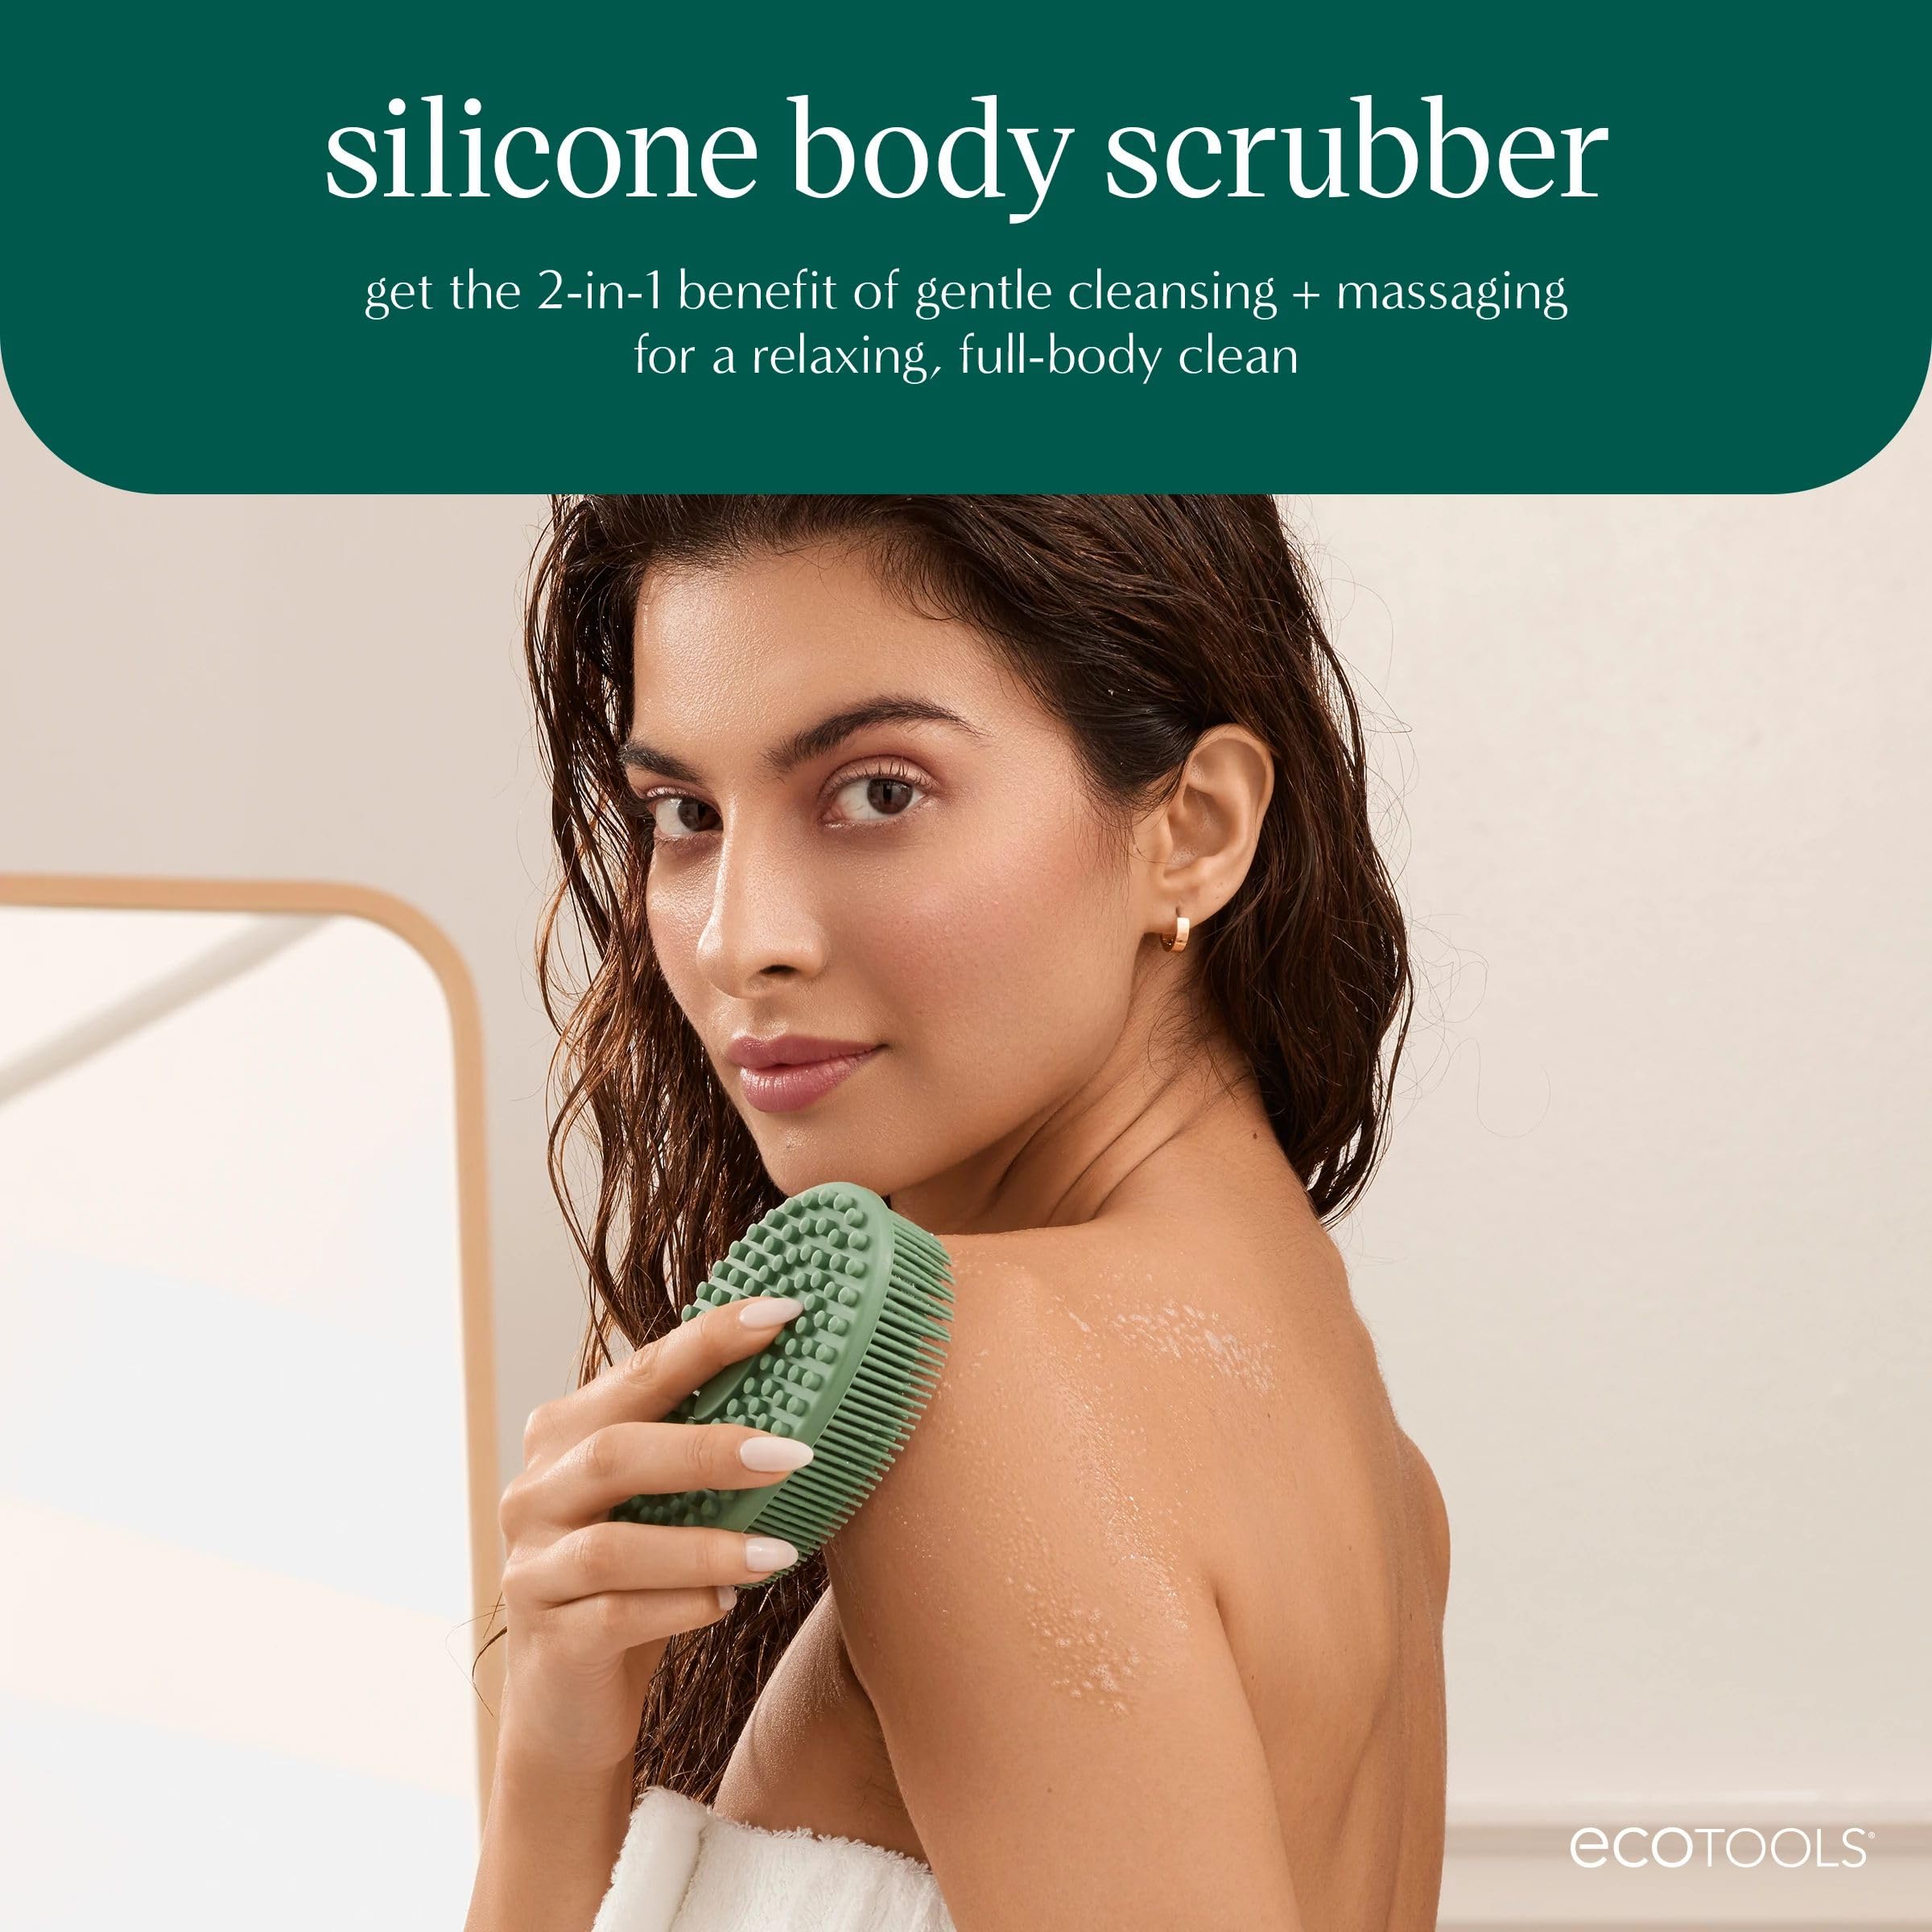 EcoTools Silicone Body Scrubber, for Gentle Cleansing & Exfoliating, 2-in-1 Silicone Scrubber & Body Massager, Hygienic & Durable Bath Accessory, Eco Friendly, Vegan, & Cruelty Free, 1 Count